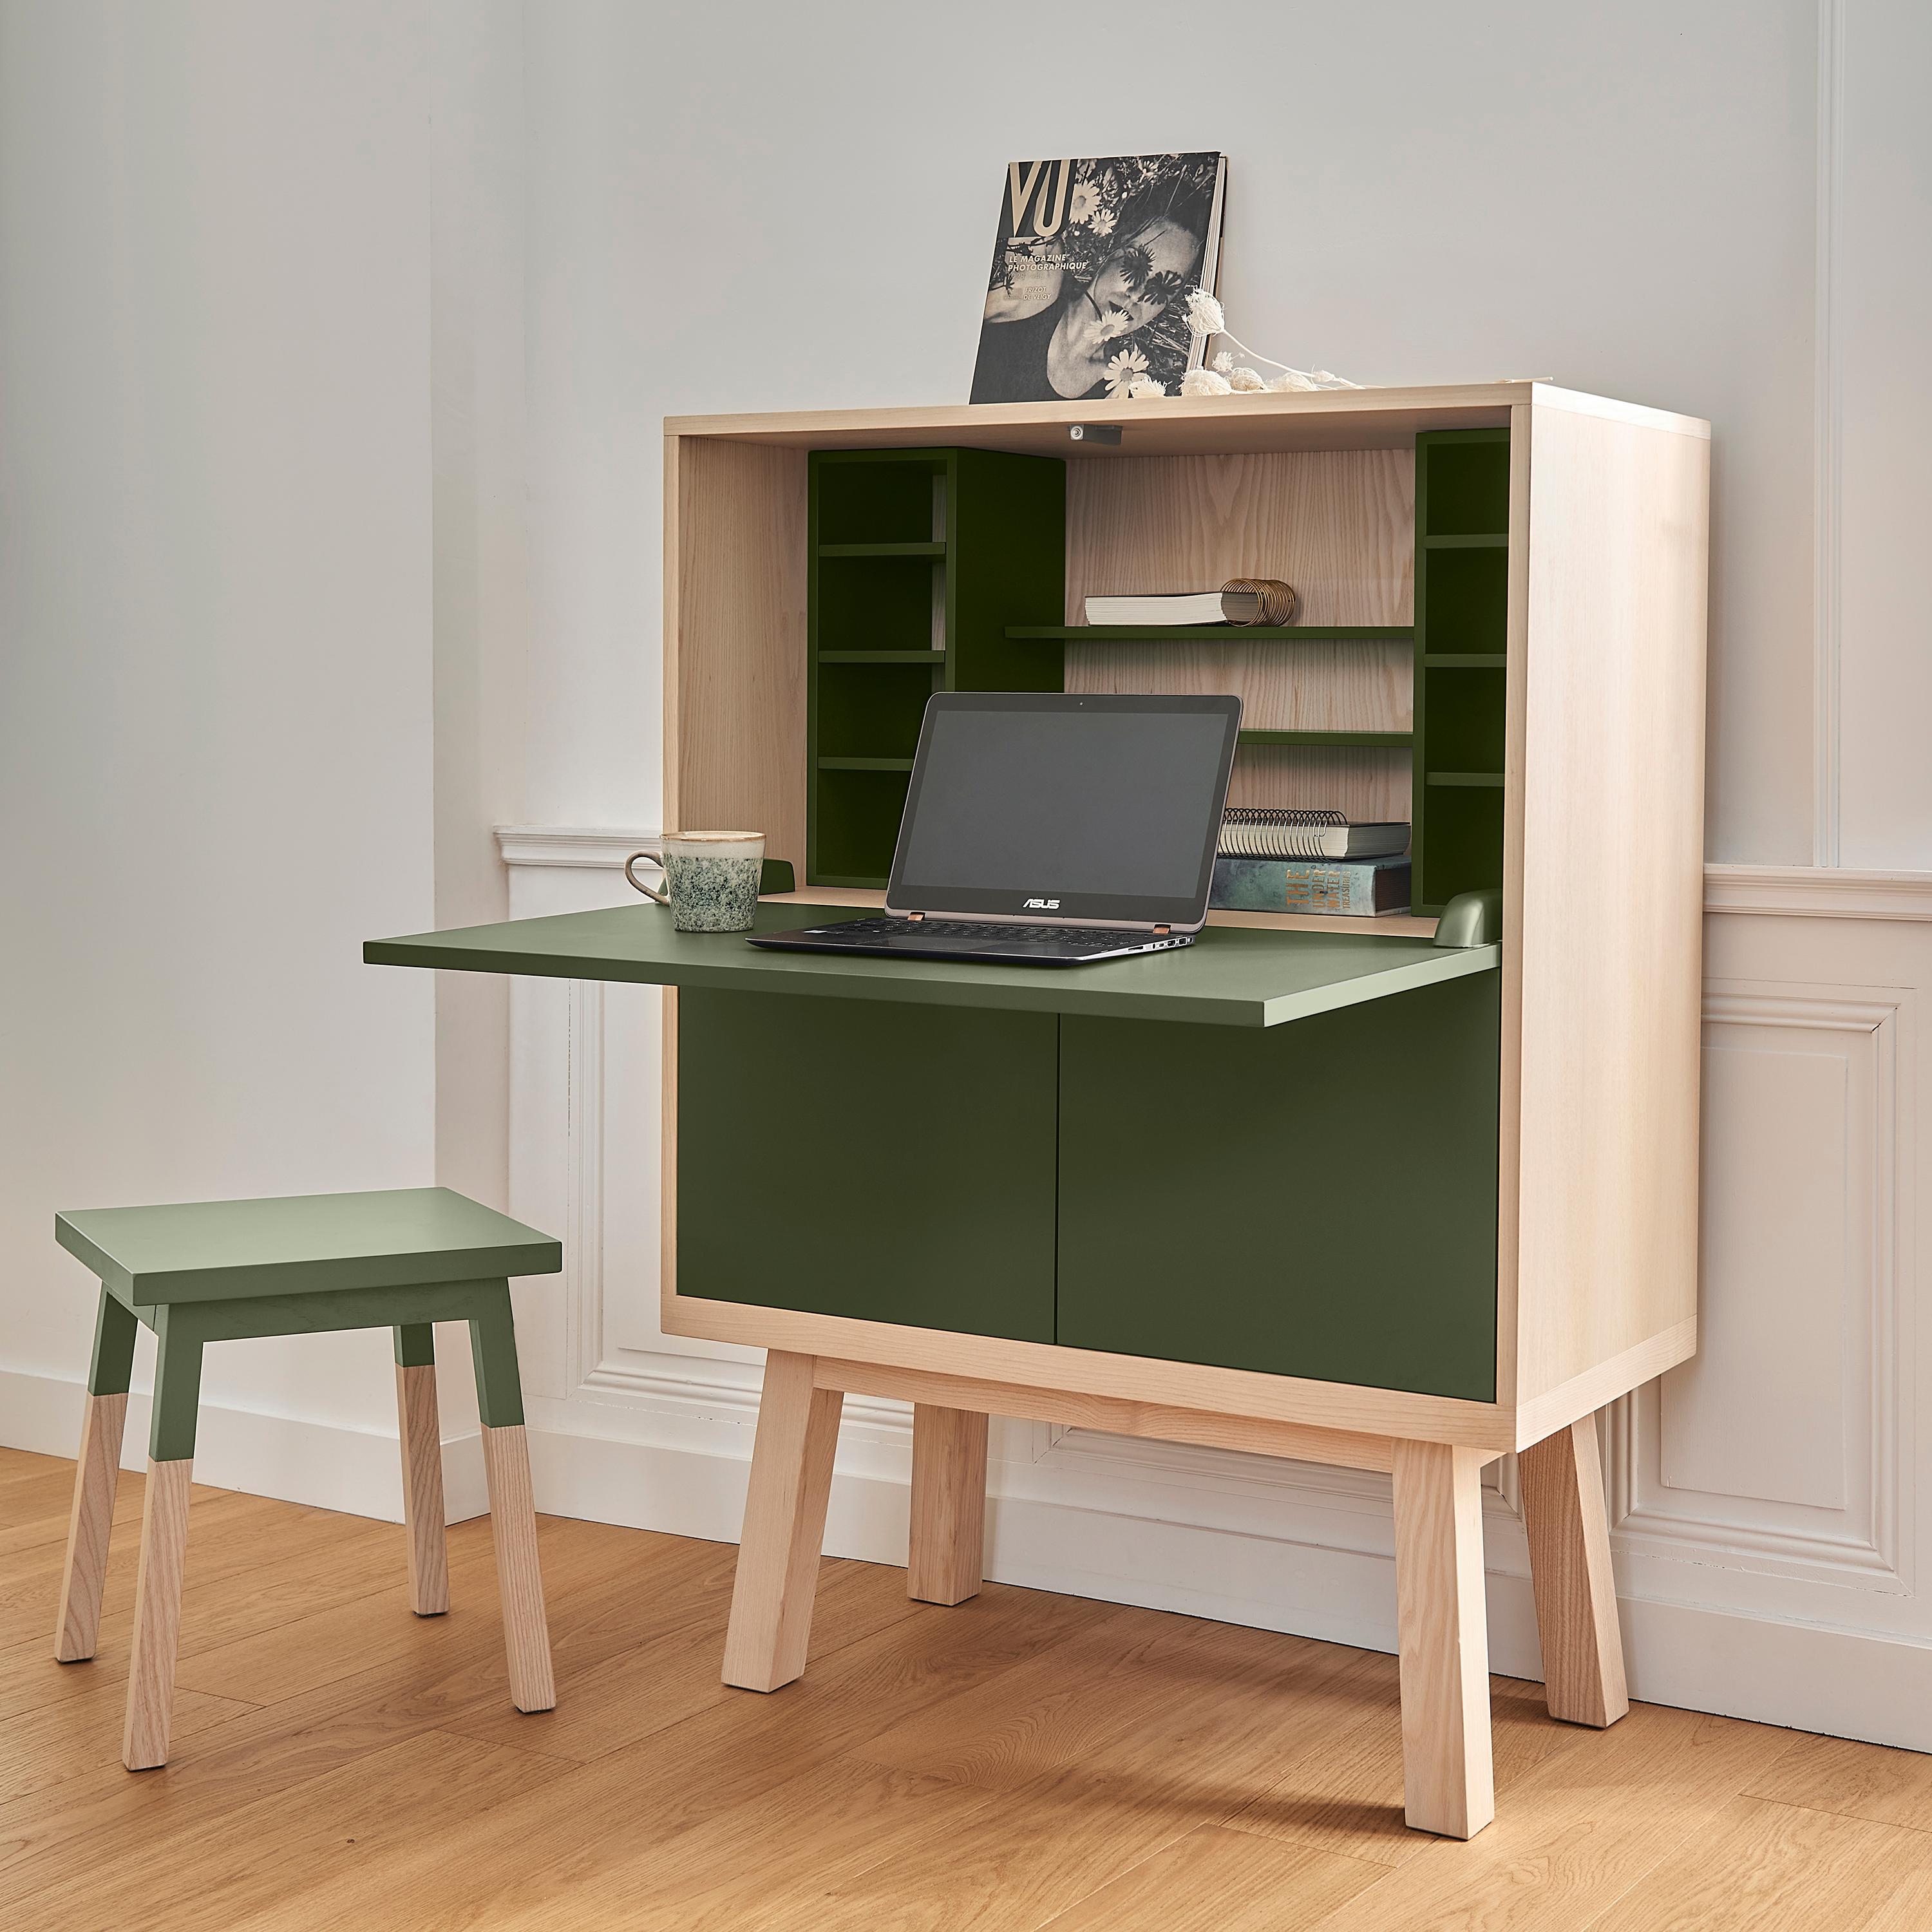 This Secretaire desk is designed by famous parisian Designer Eric Gizard and delivered fully mounted. 

The dimensions of the Box itself are width 90 cm / 35.4'' x height 90 cm / 35.4'' x depth 46 cm / 18;11''
Height of the feet is 35 cm /